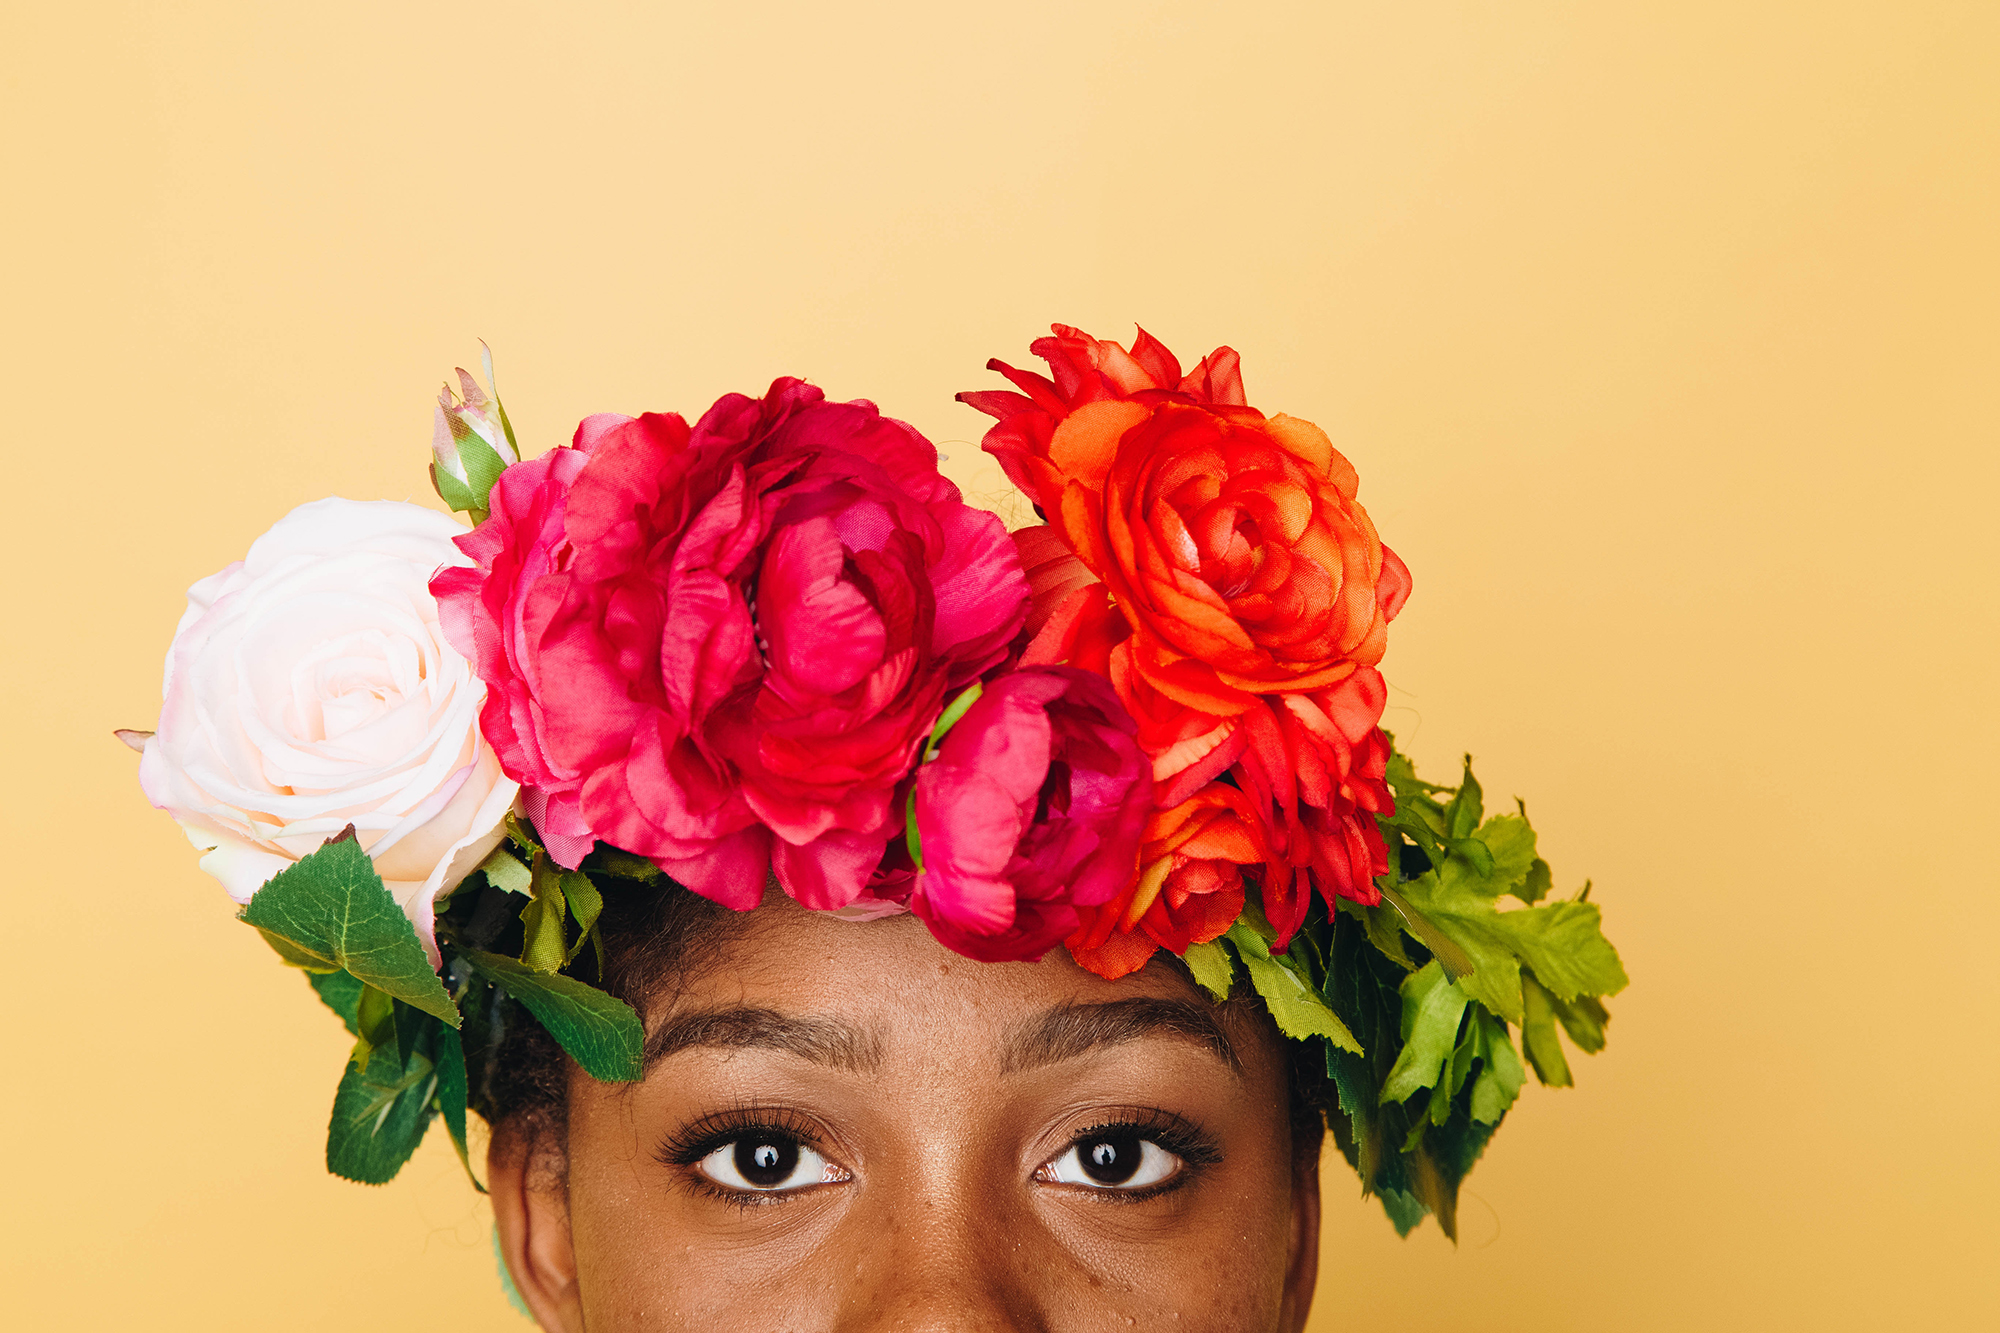 Portrait from the bridge of the nose up of a Black woman in flower crown.